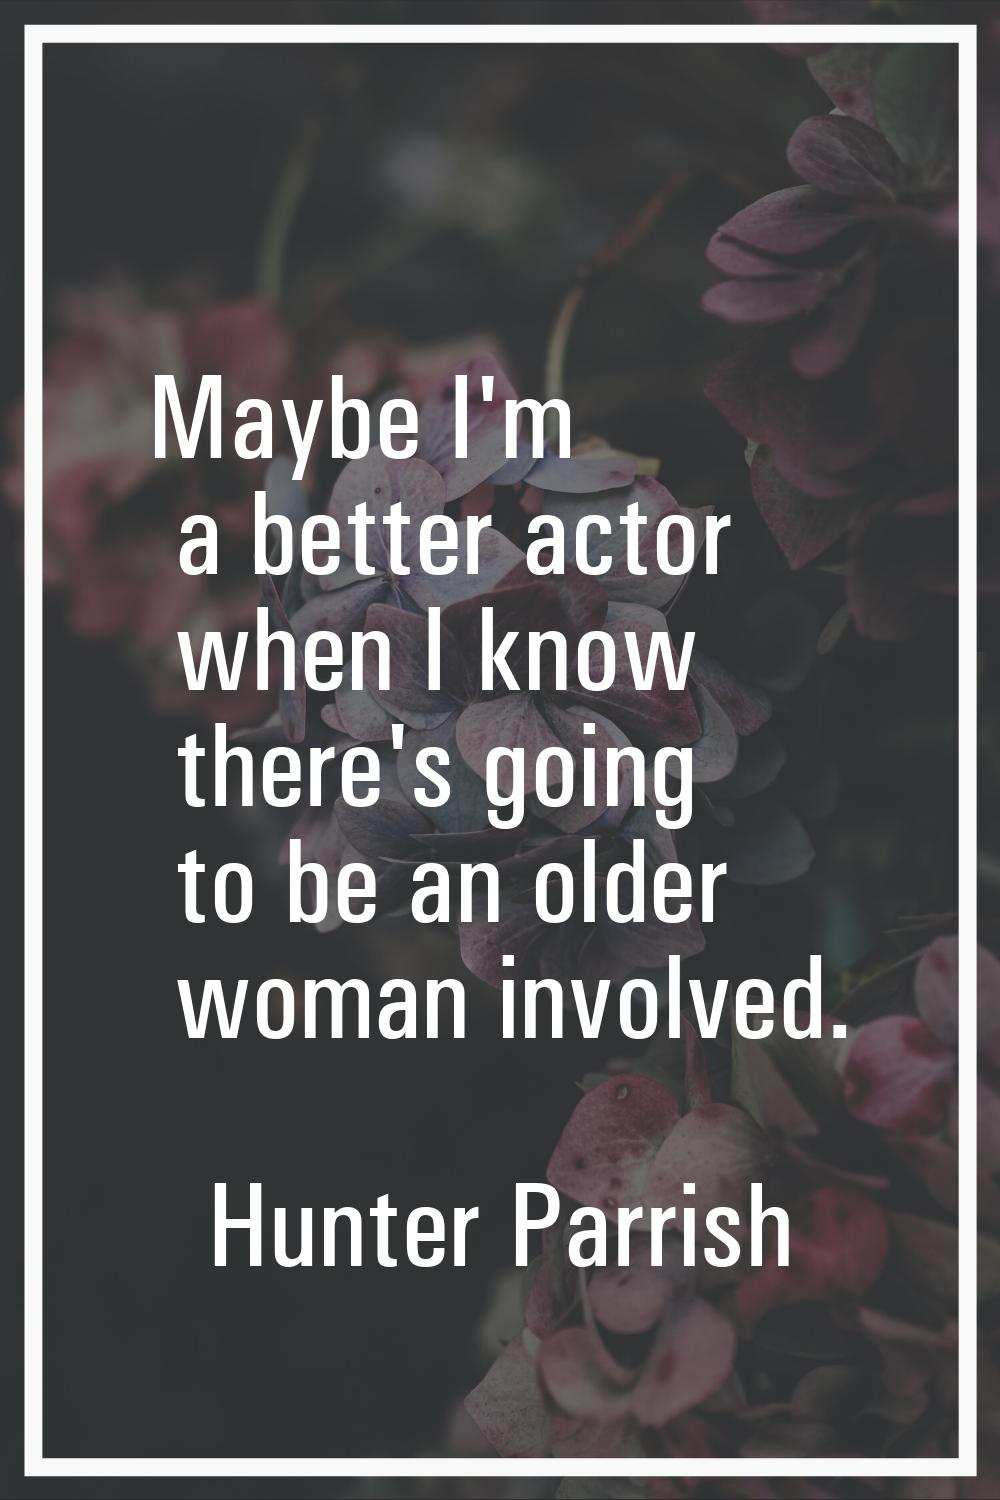 Maybe I'm a better actor when I know there's going to be an older woman involved.